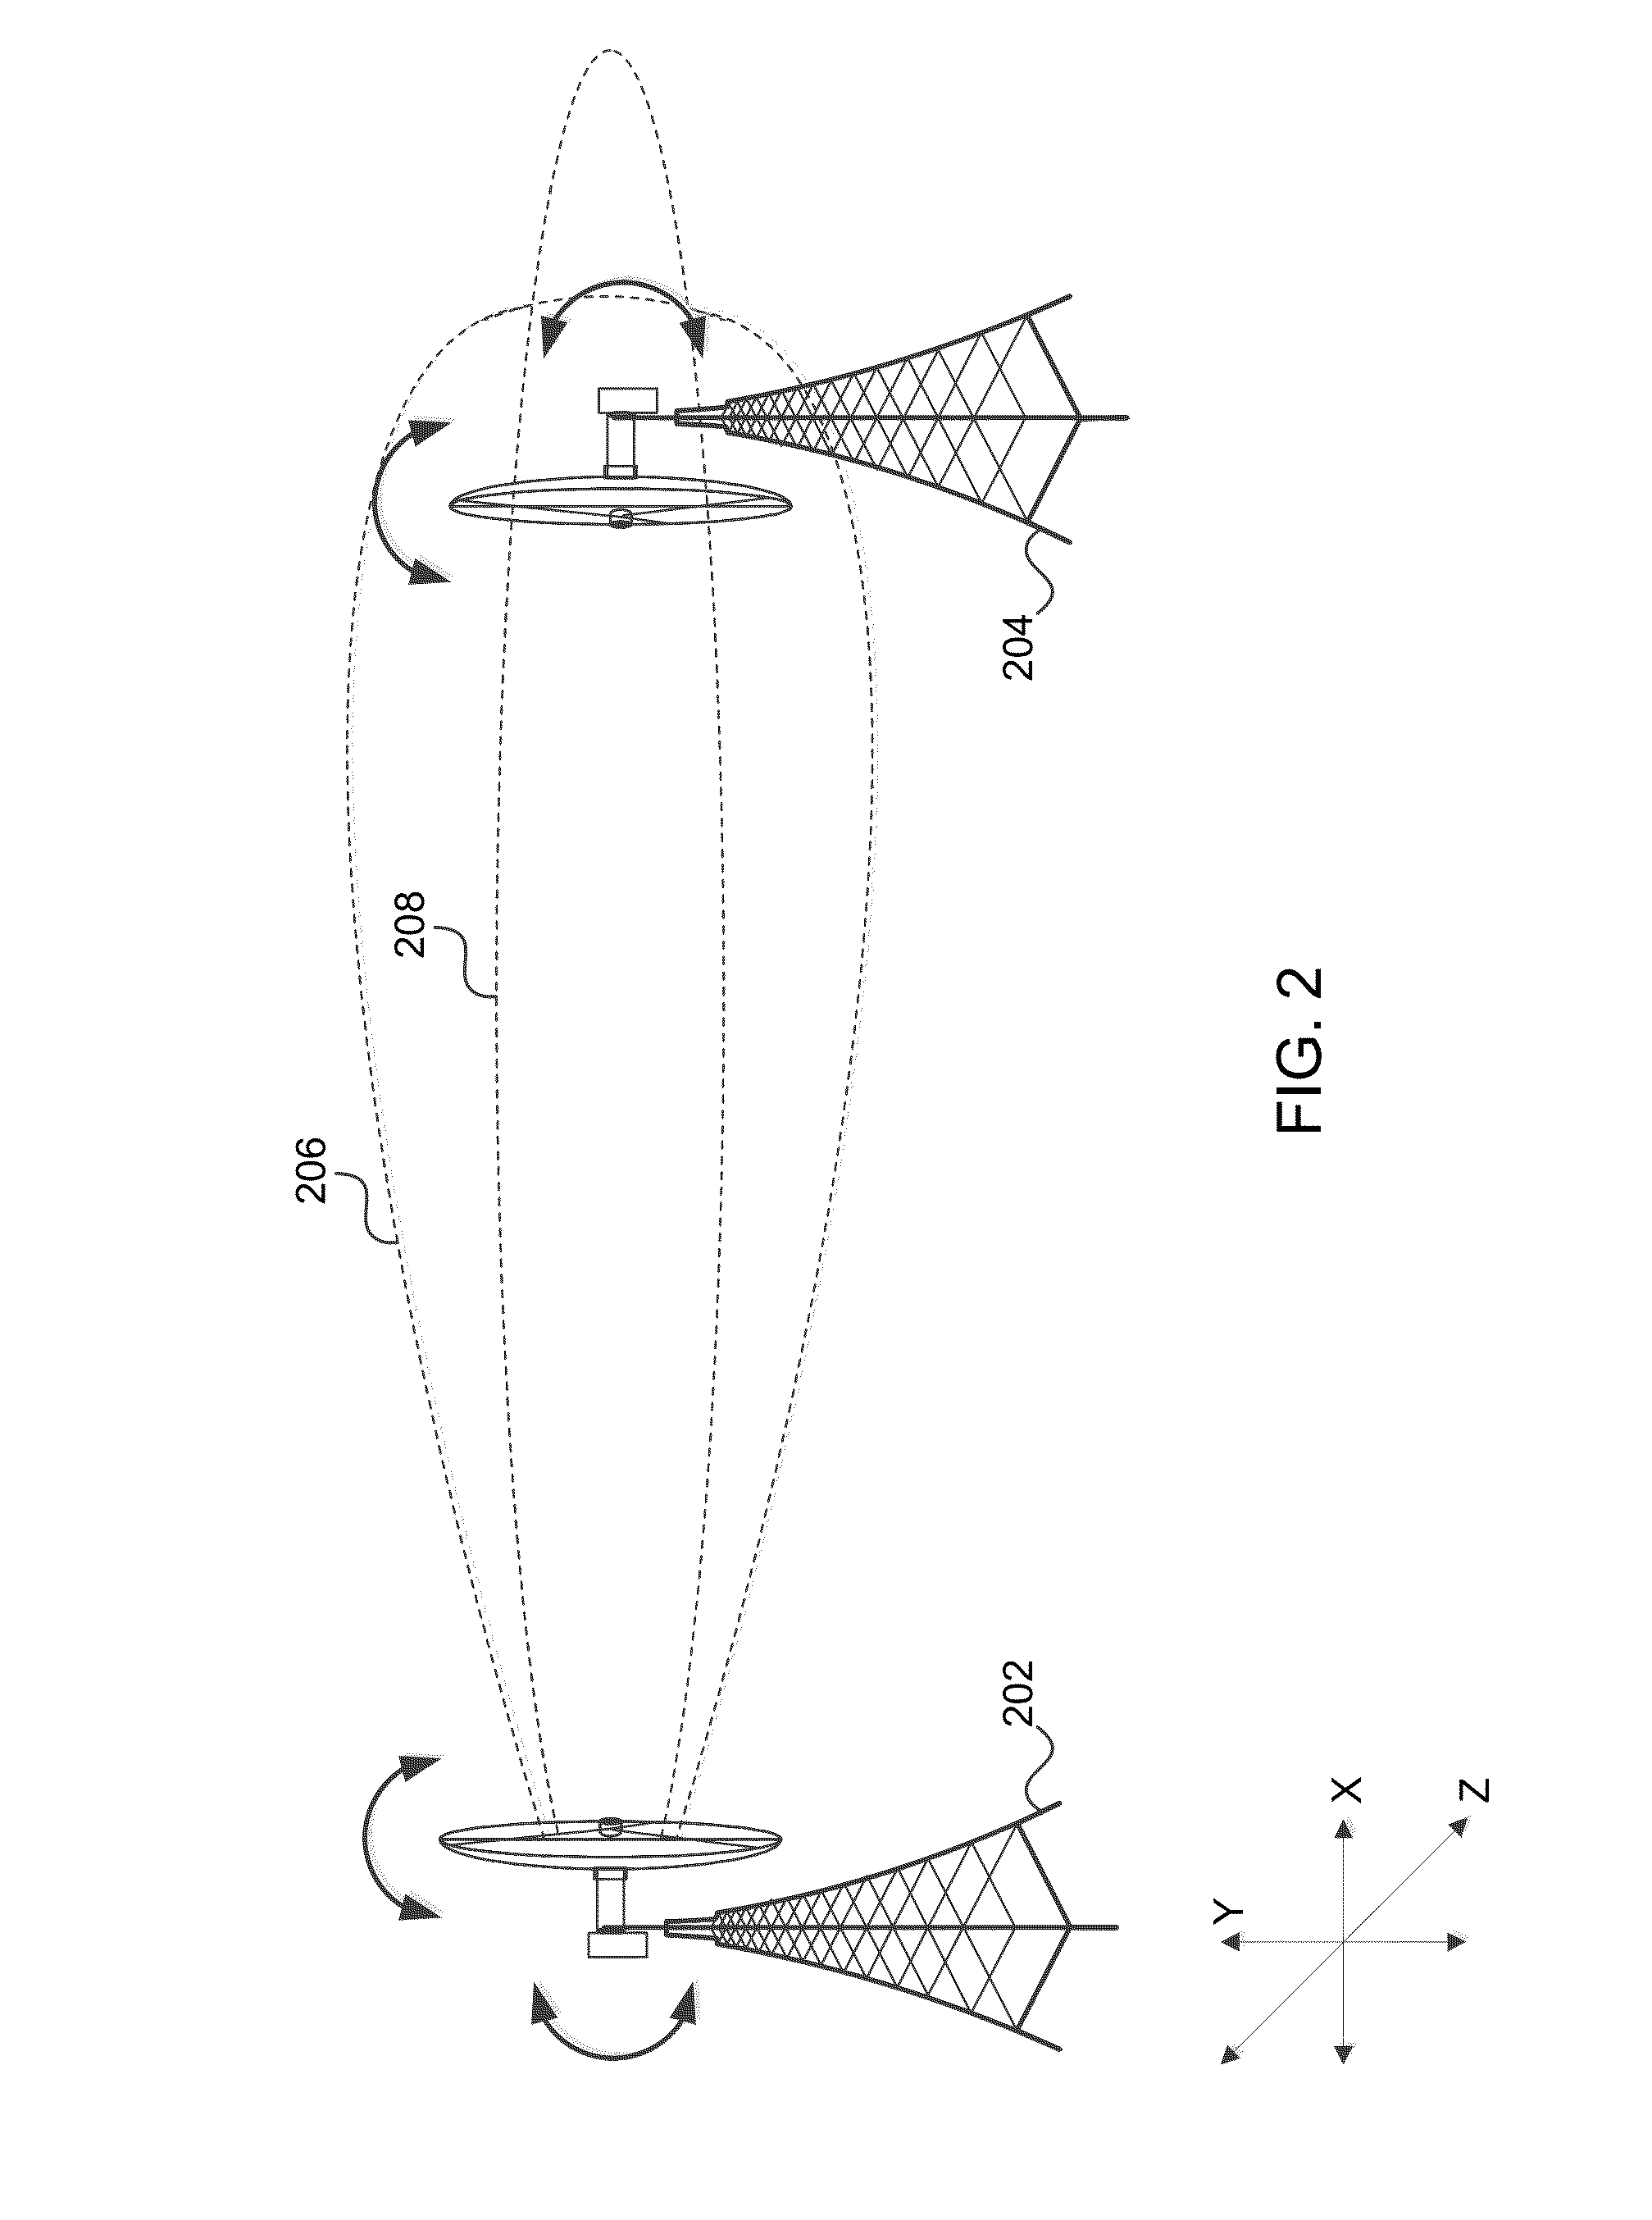 Systems and Methods of Antenna Orientation in a Point-To-Point Wireless Network